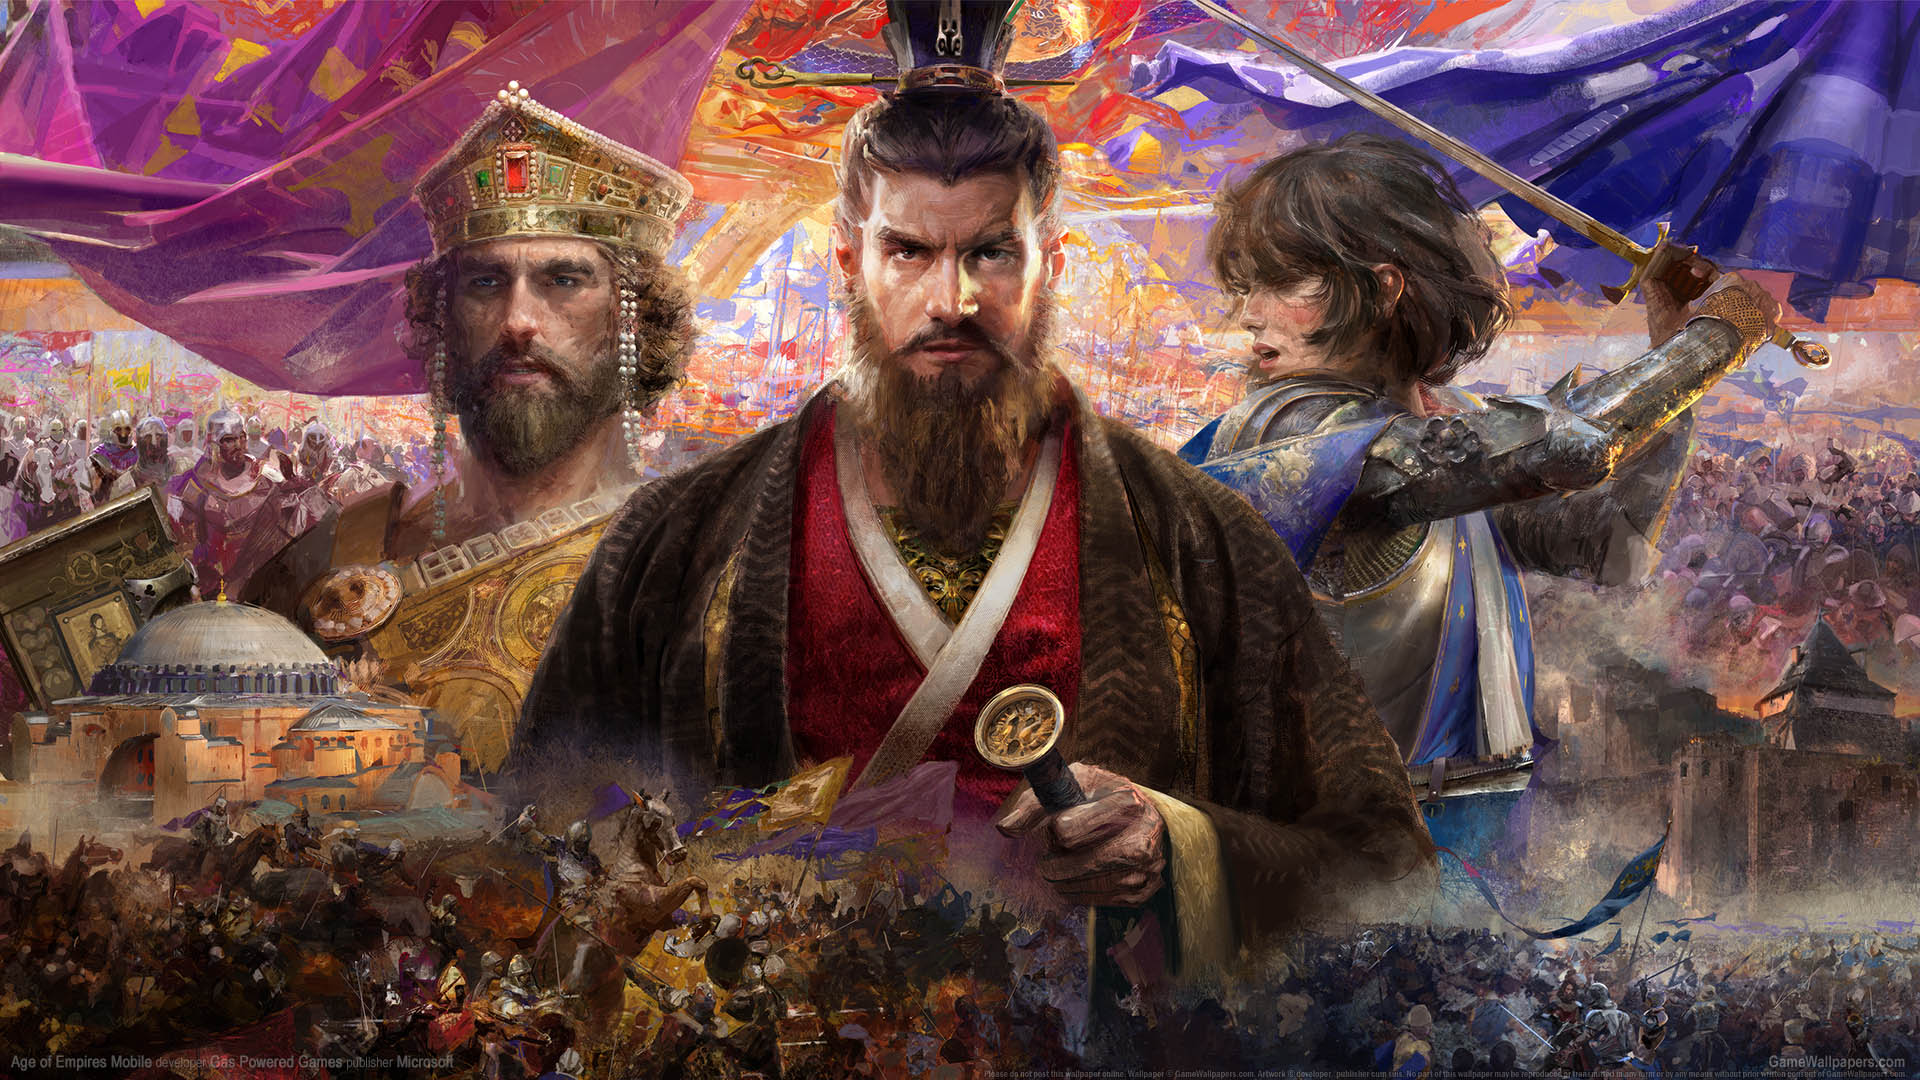 Age of Empires Mobile achtergrond 01 1920x1080